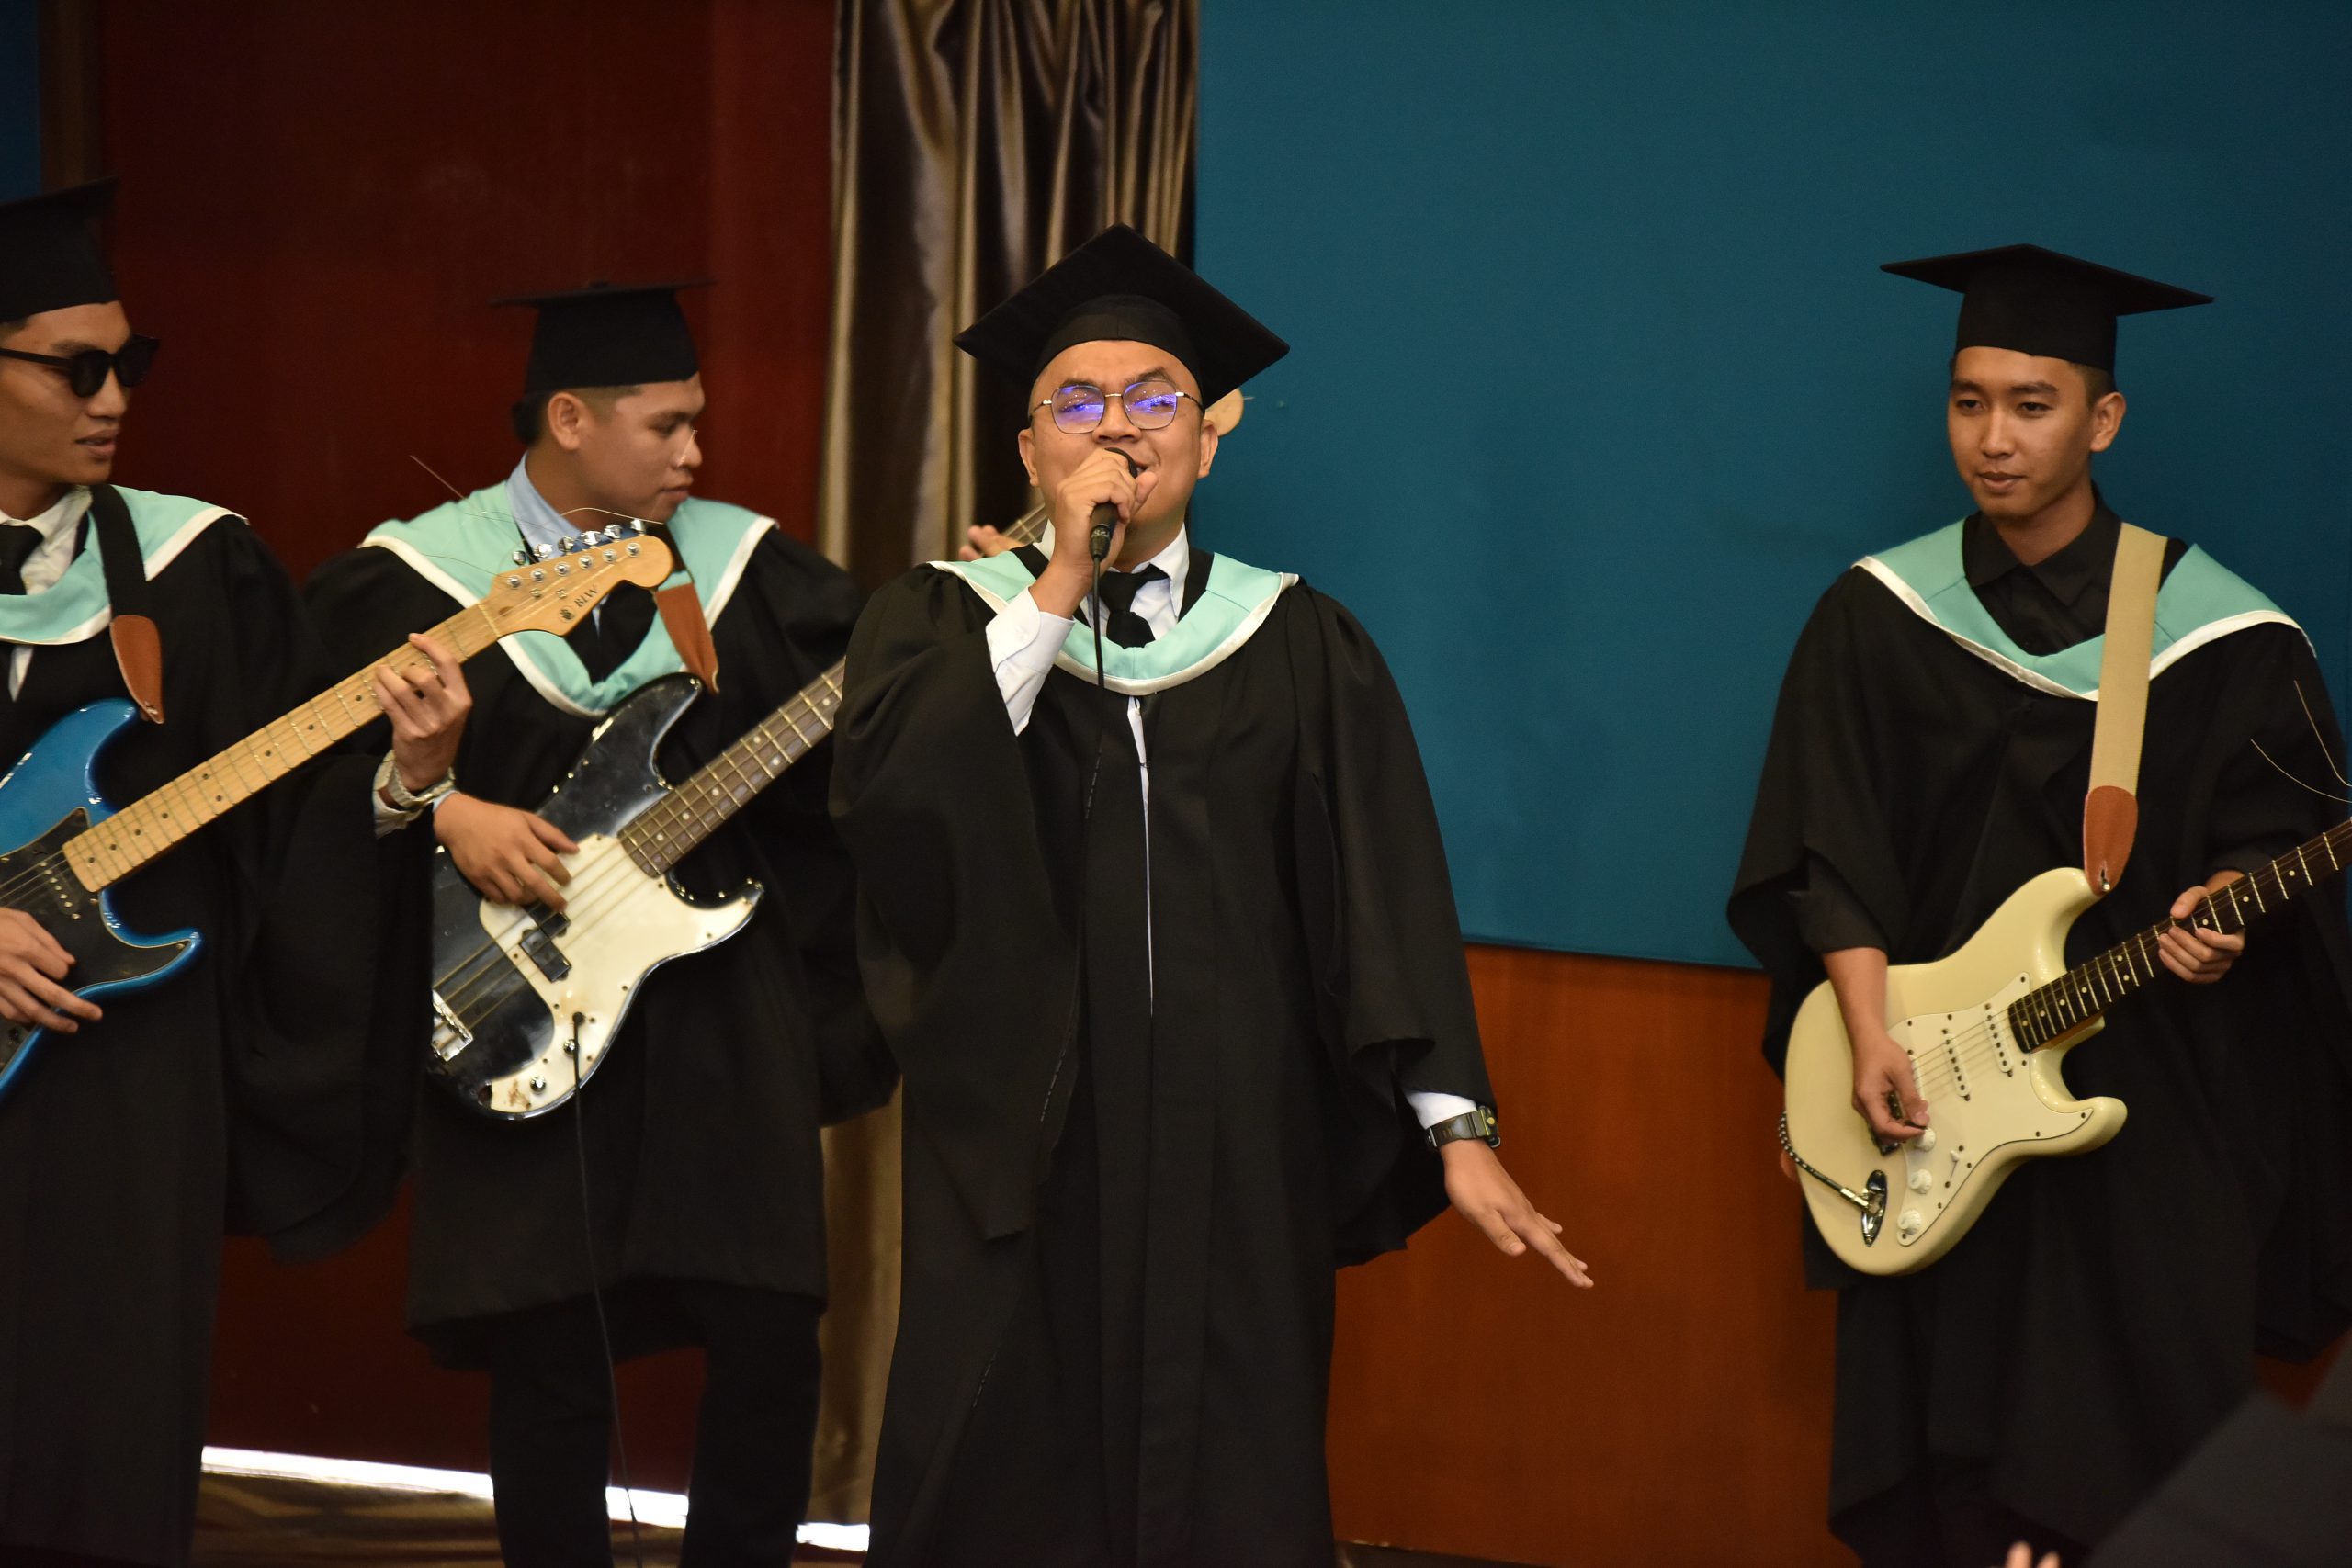 Not only the graduates are skilled and competent technicians, but their singing talents also  shone in a special performance during the event.